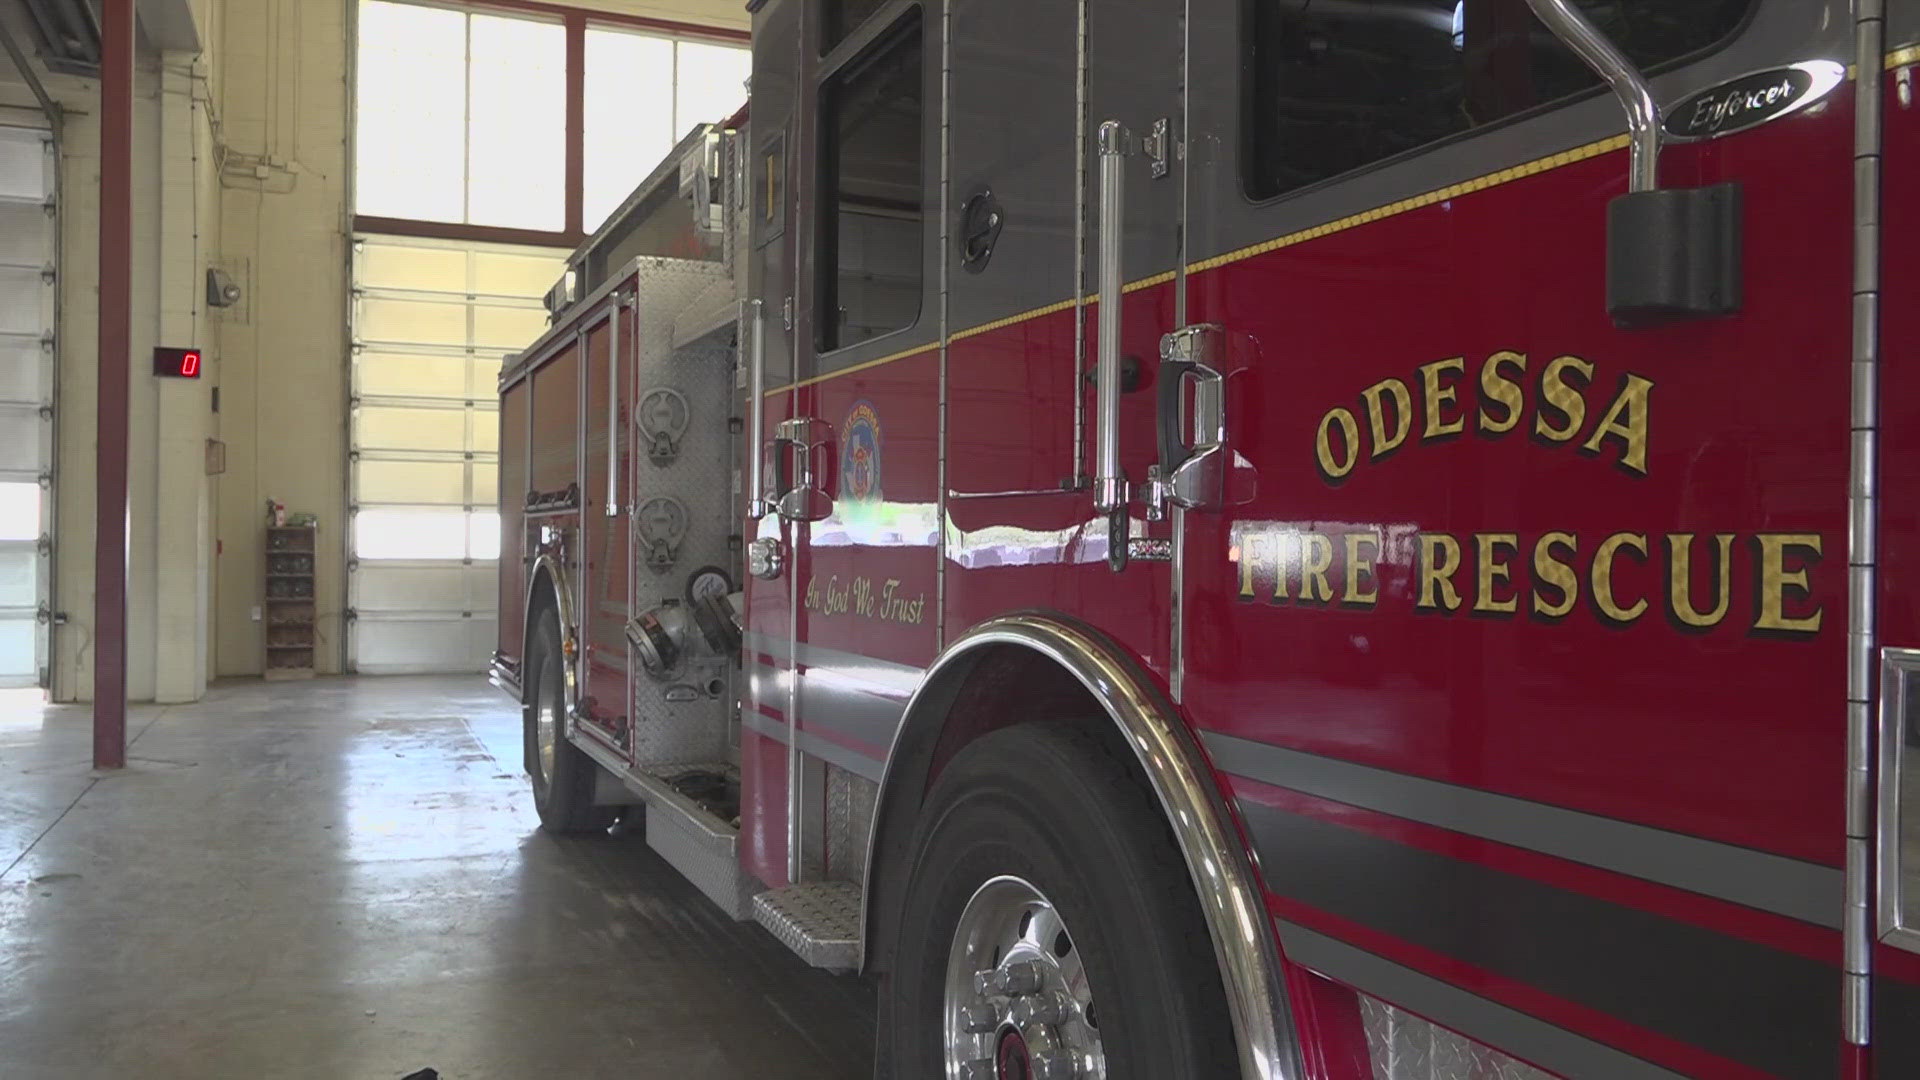 The new pay raises will take effect in May and keep Odessa Fire Rescue competitive with bigger areas.